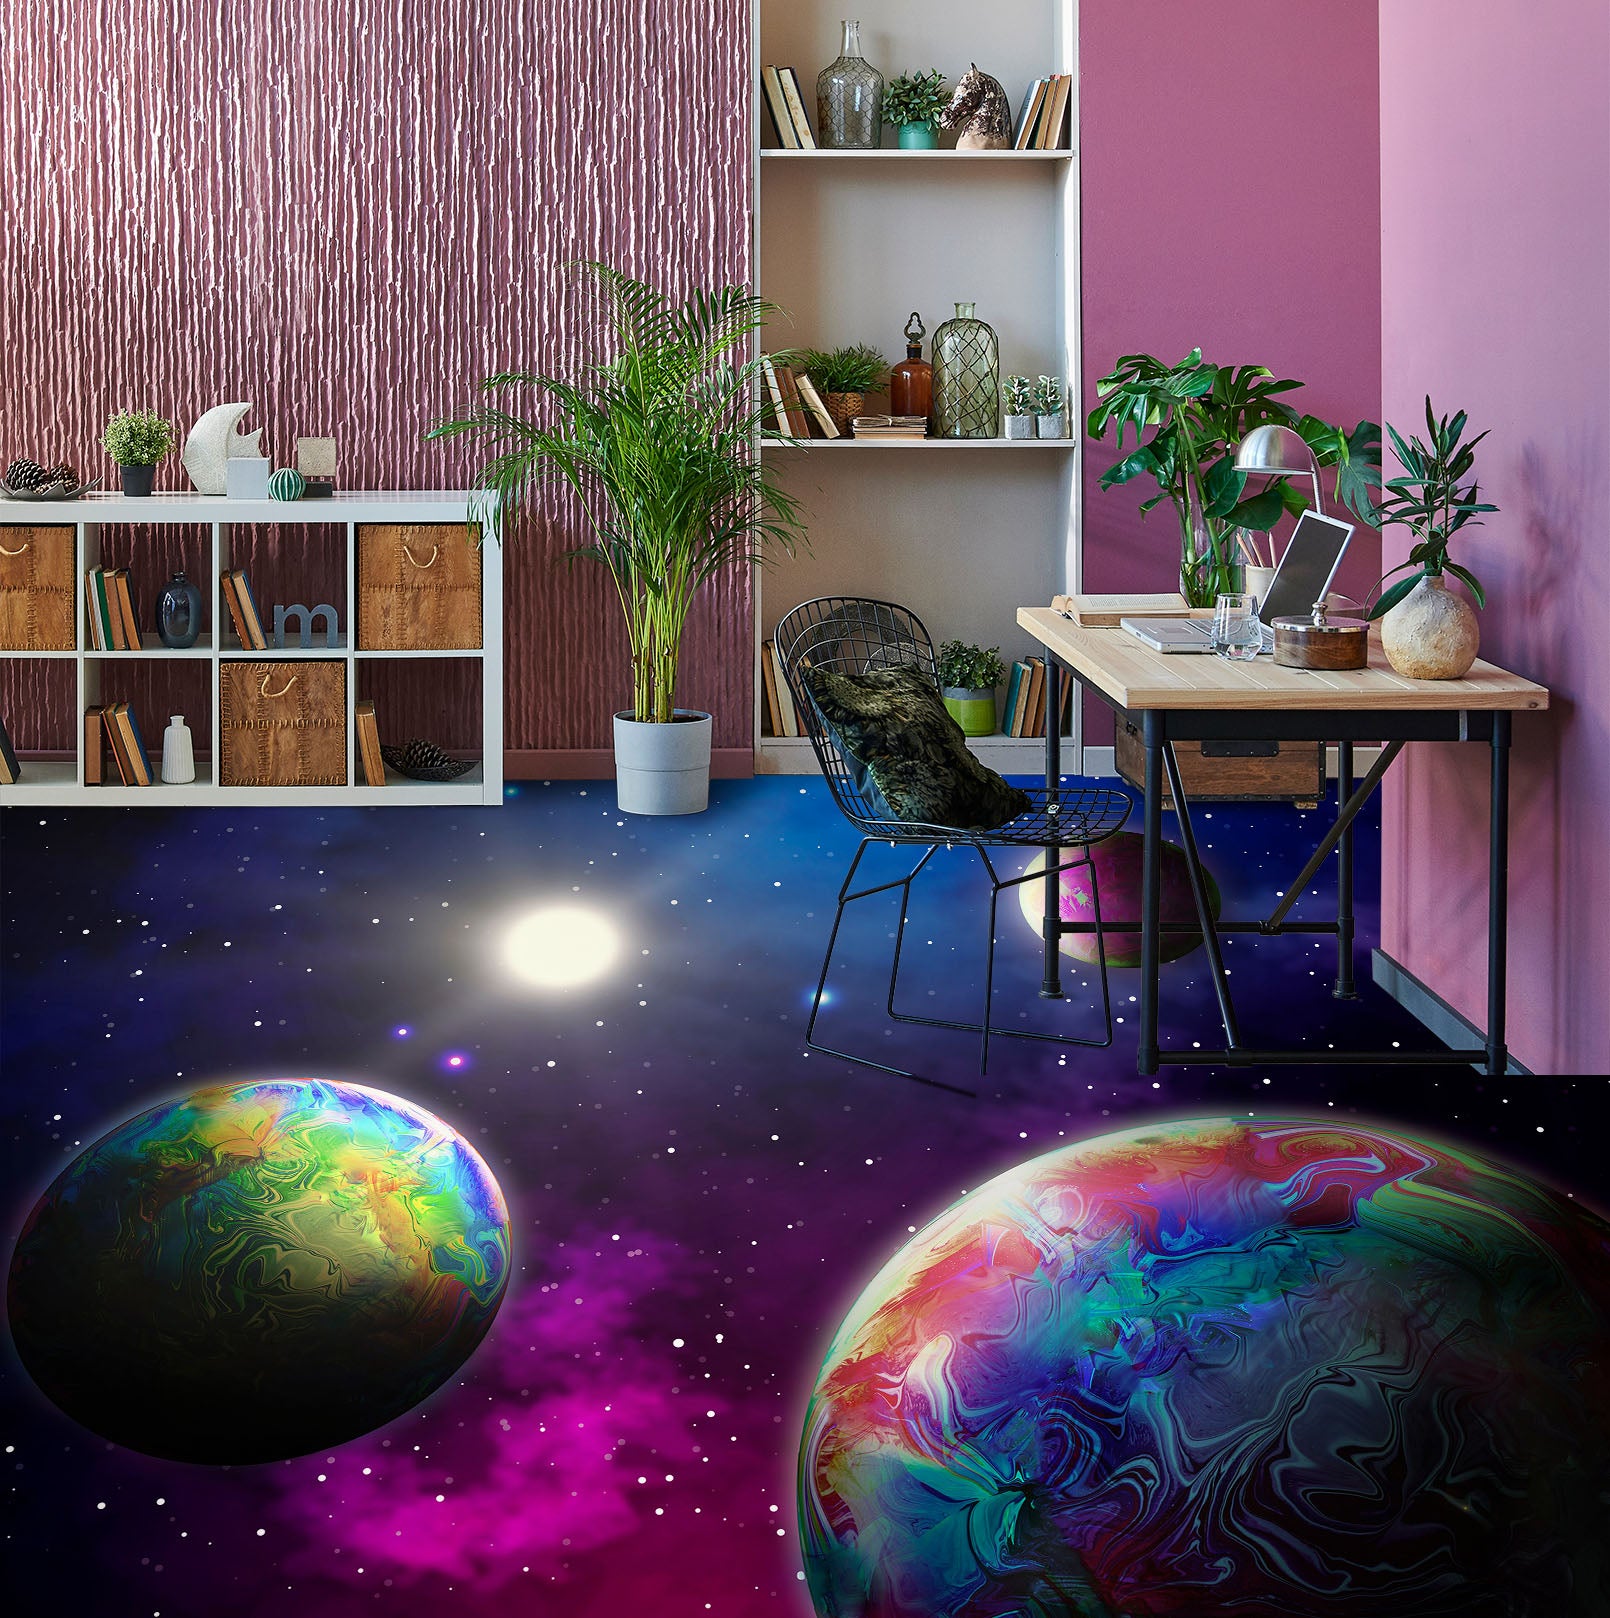 3D Colored Planets 1268 Floor Mural  Wallpaper Murals Self-Adhesive Removable Print Epoxy